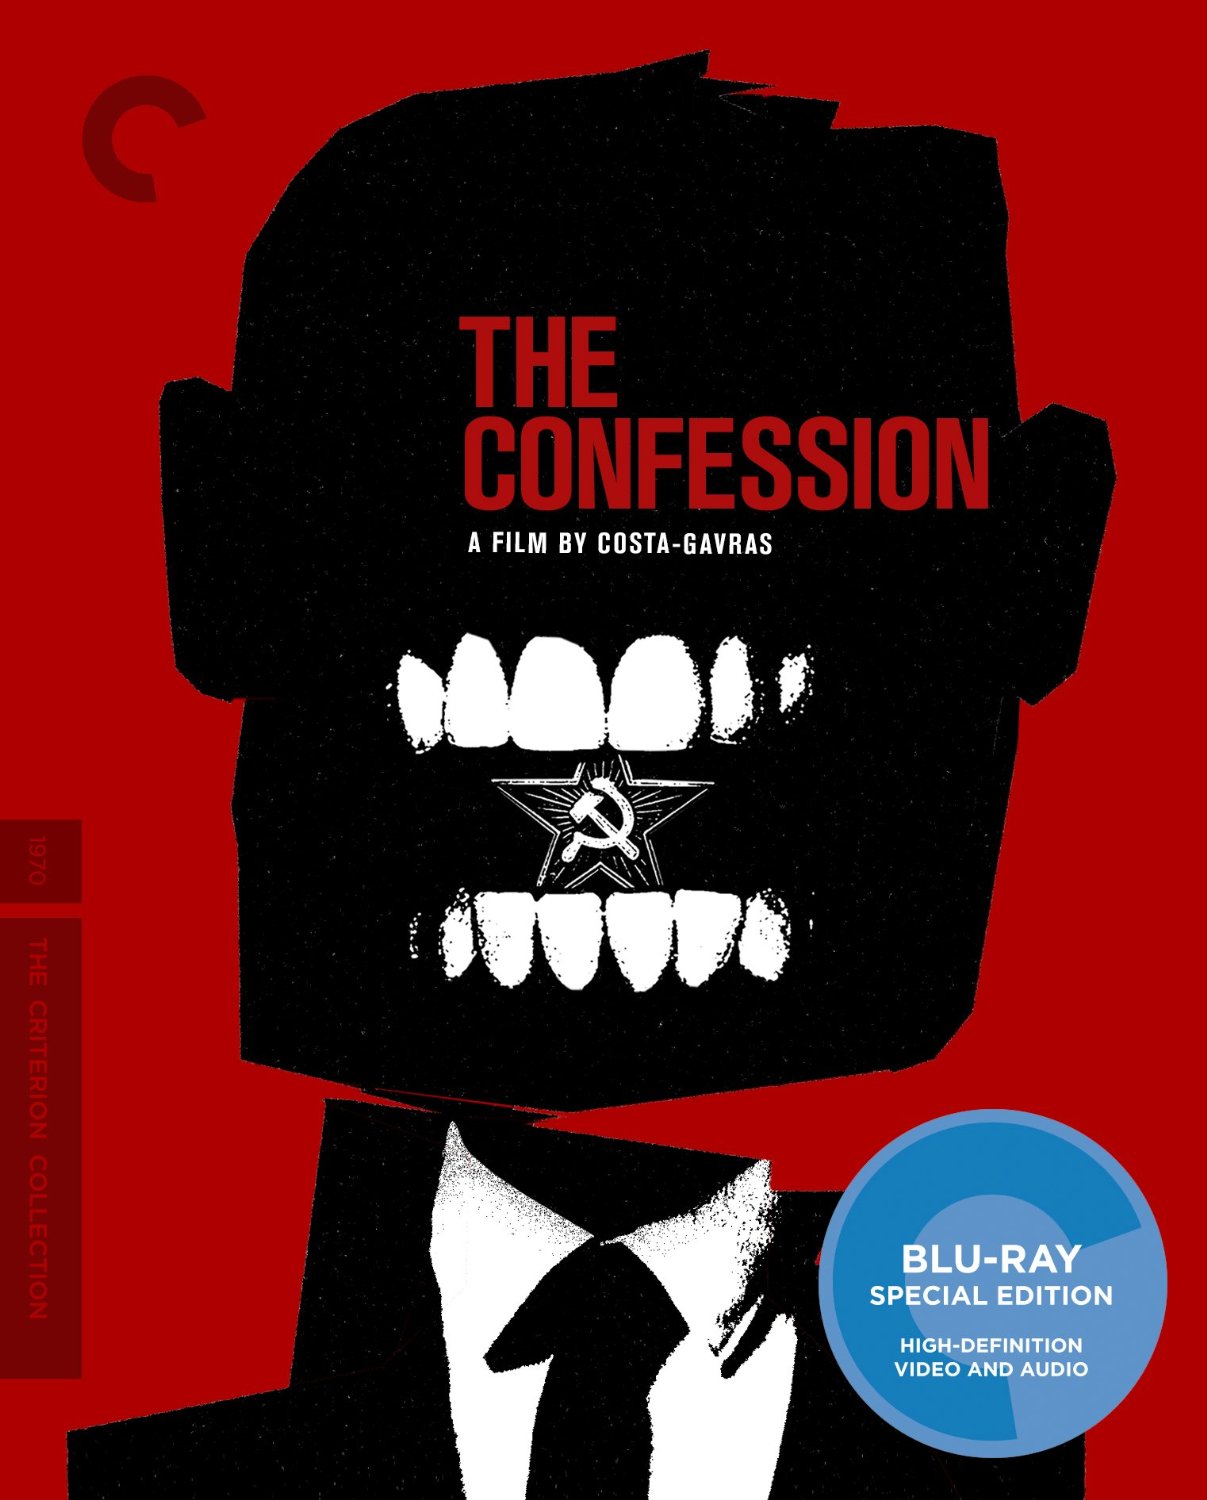 The Confession Criterion Collection Box Art